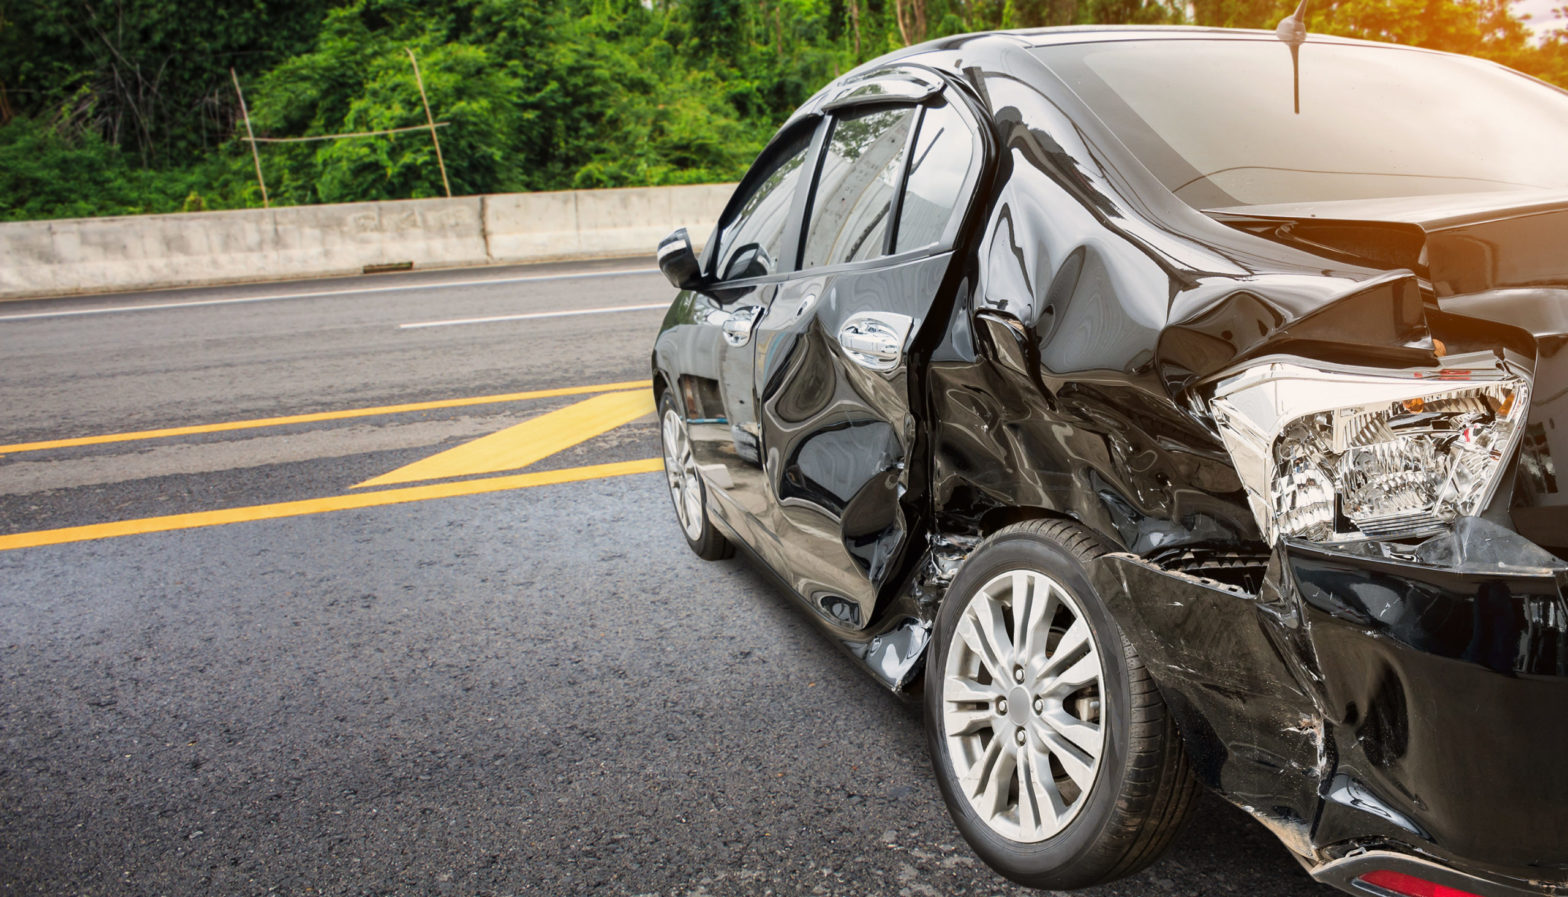 car accident determining fault by location of damage